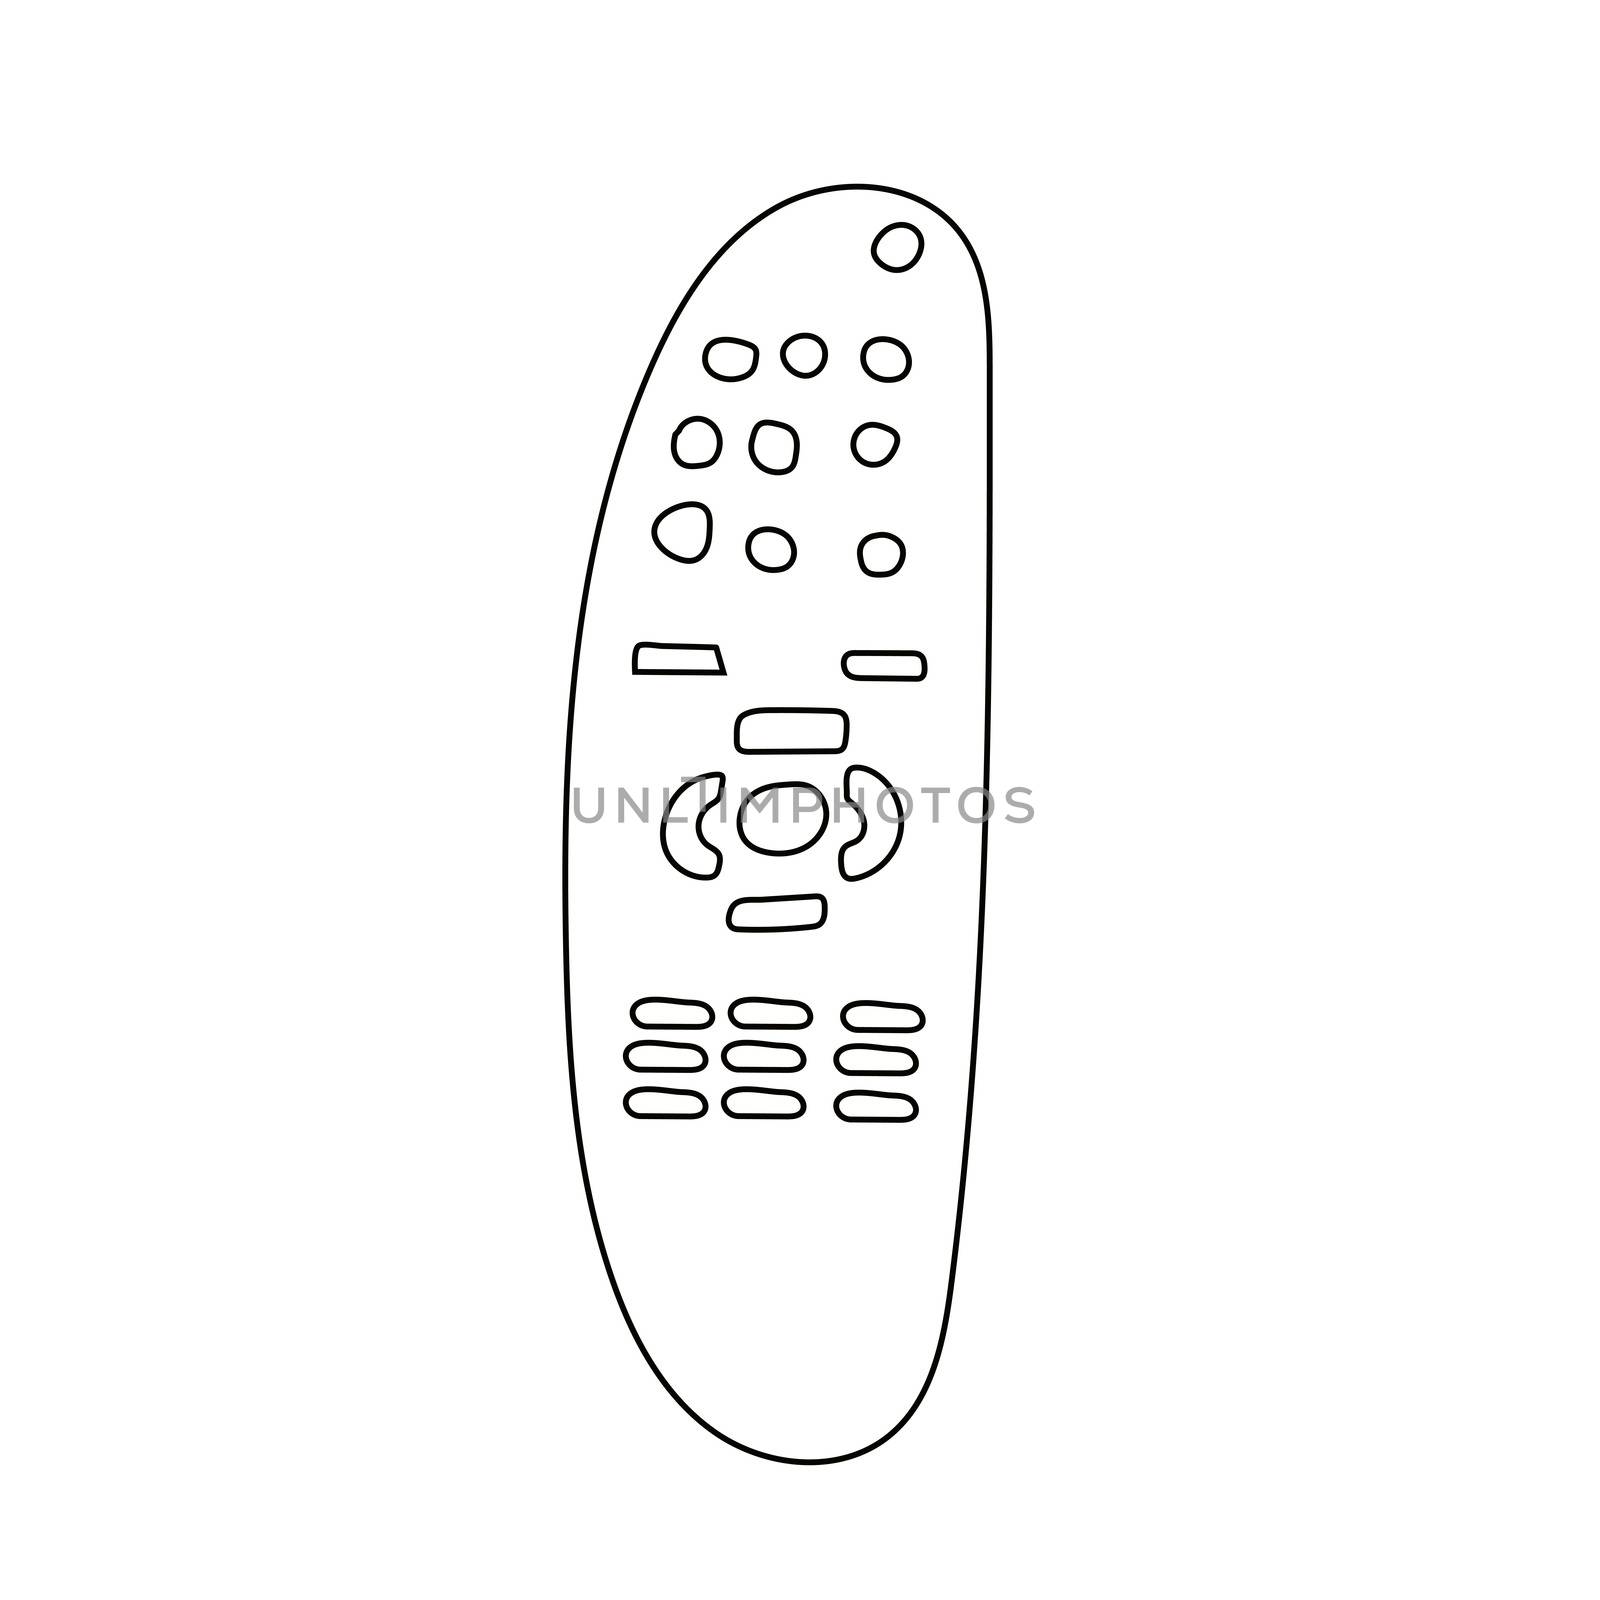 TV remote control doodle. illustration. Buttons. by zaryov